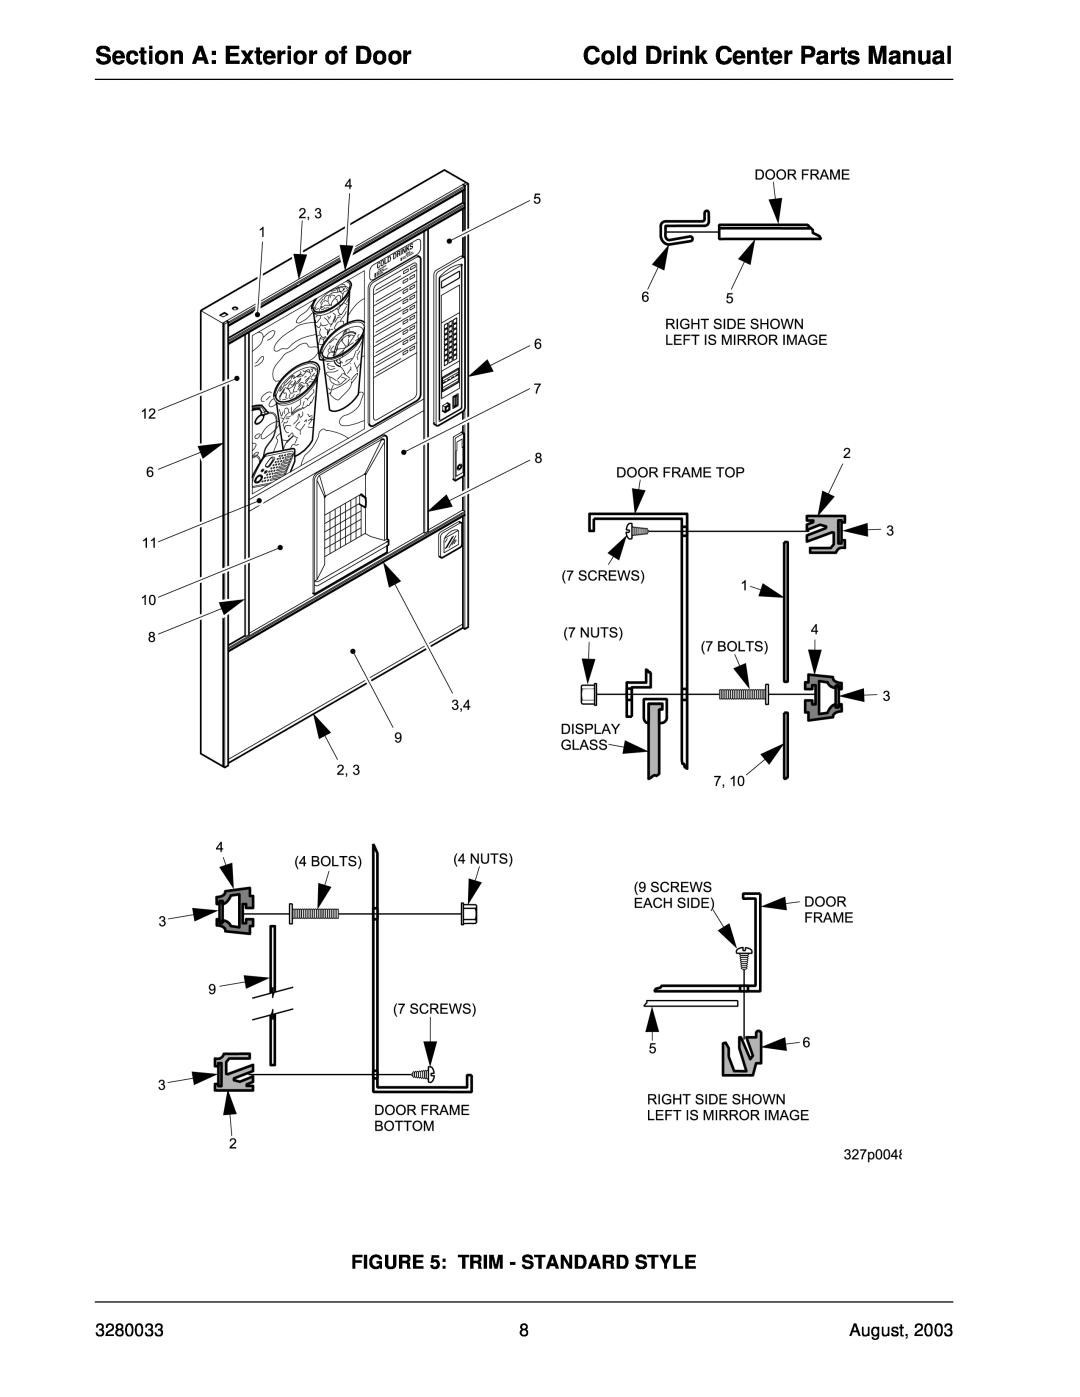 Crane Merchandising Systems 328, 327 Section A Exterior of Door, Cold Drink Center Parts Manual, Trim - Standard Style 